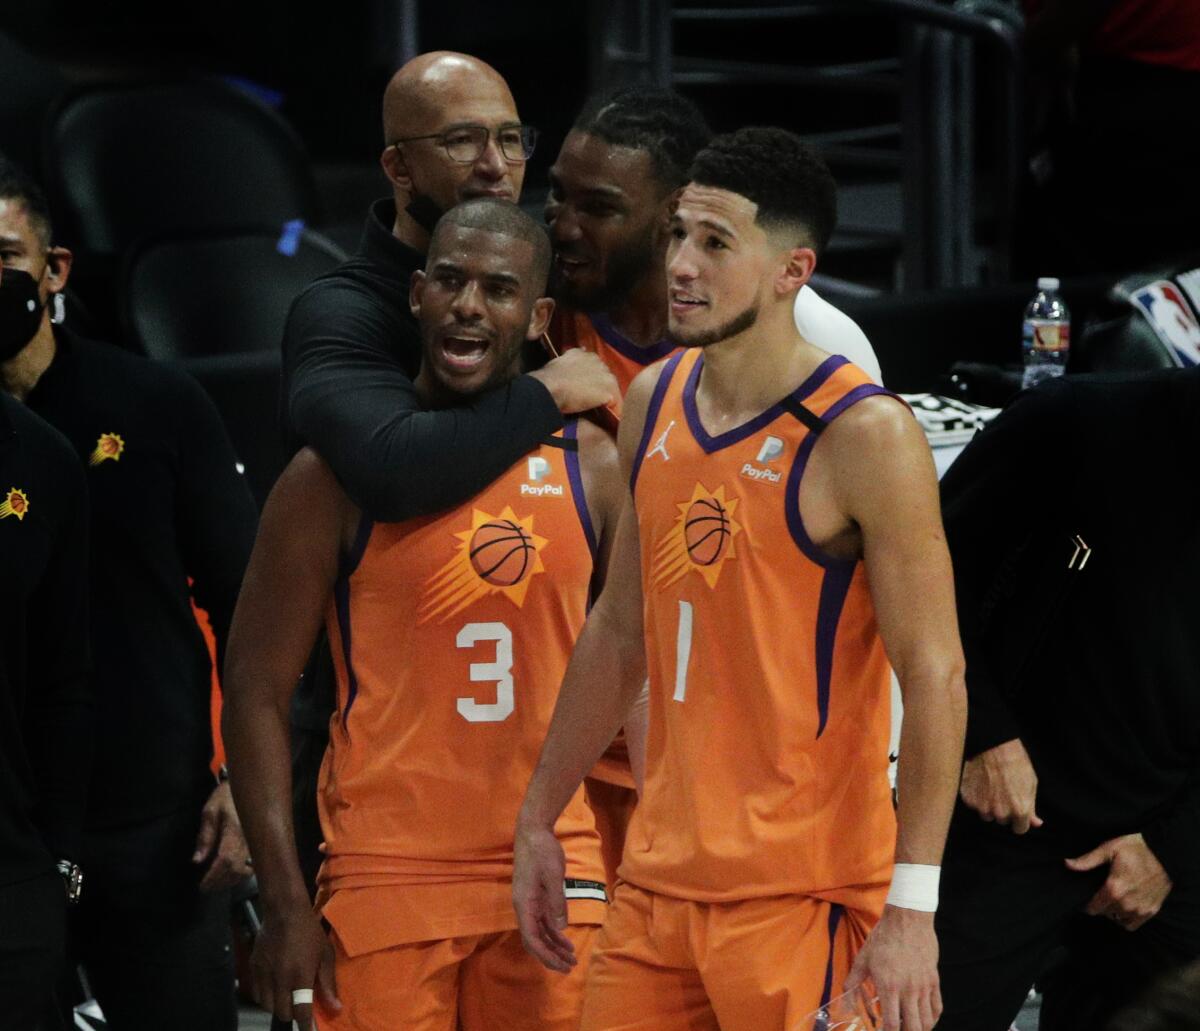 Suns Coach Monty Williams hugs guard Chris Paul as teammate Devin Booker, right, stands nearby.